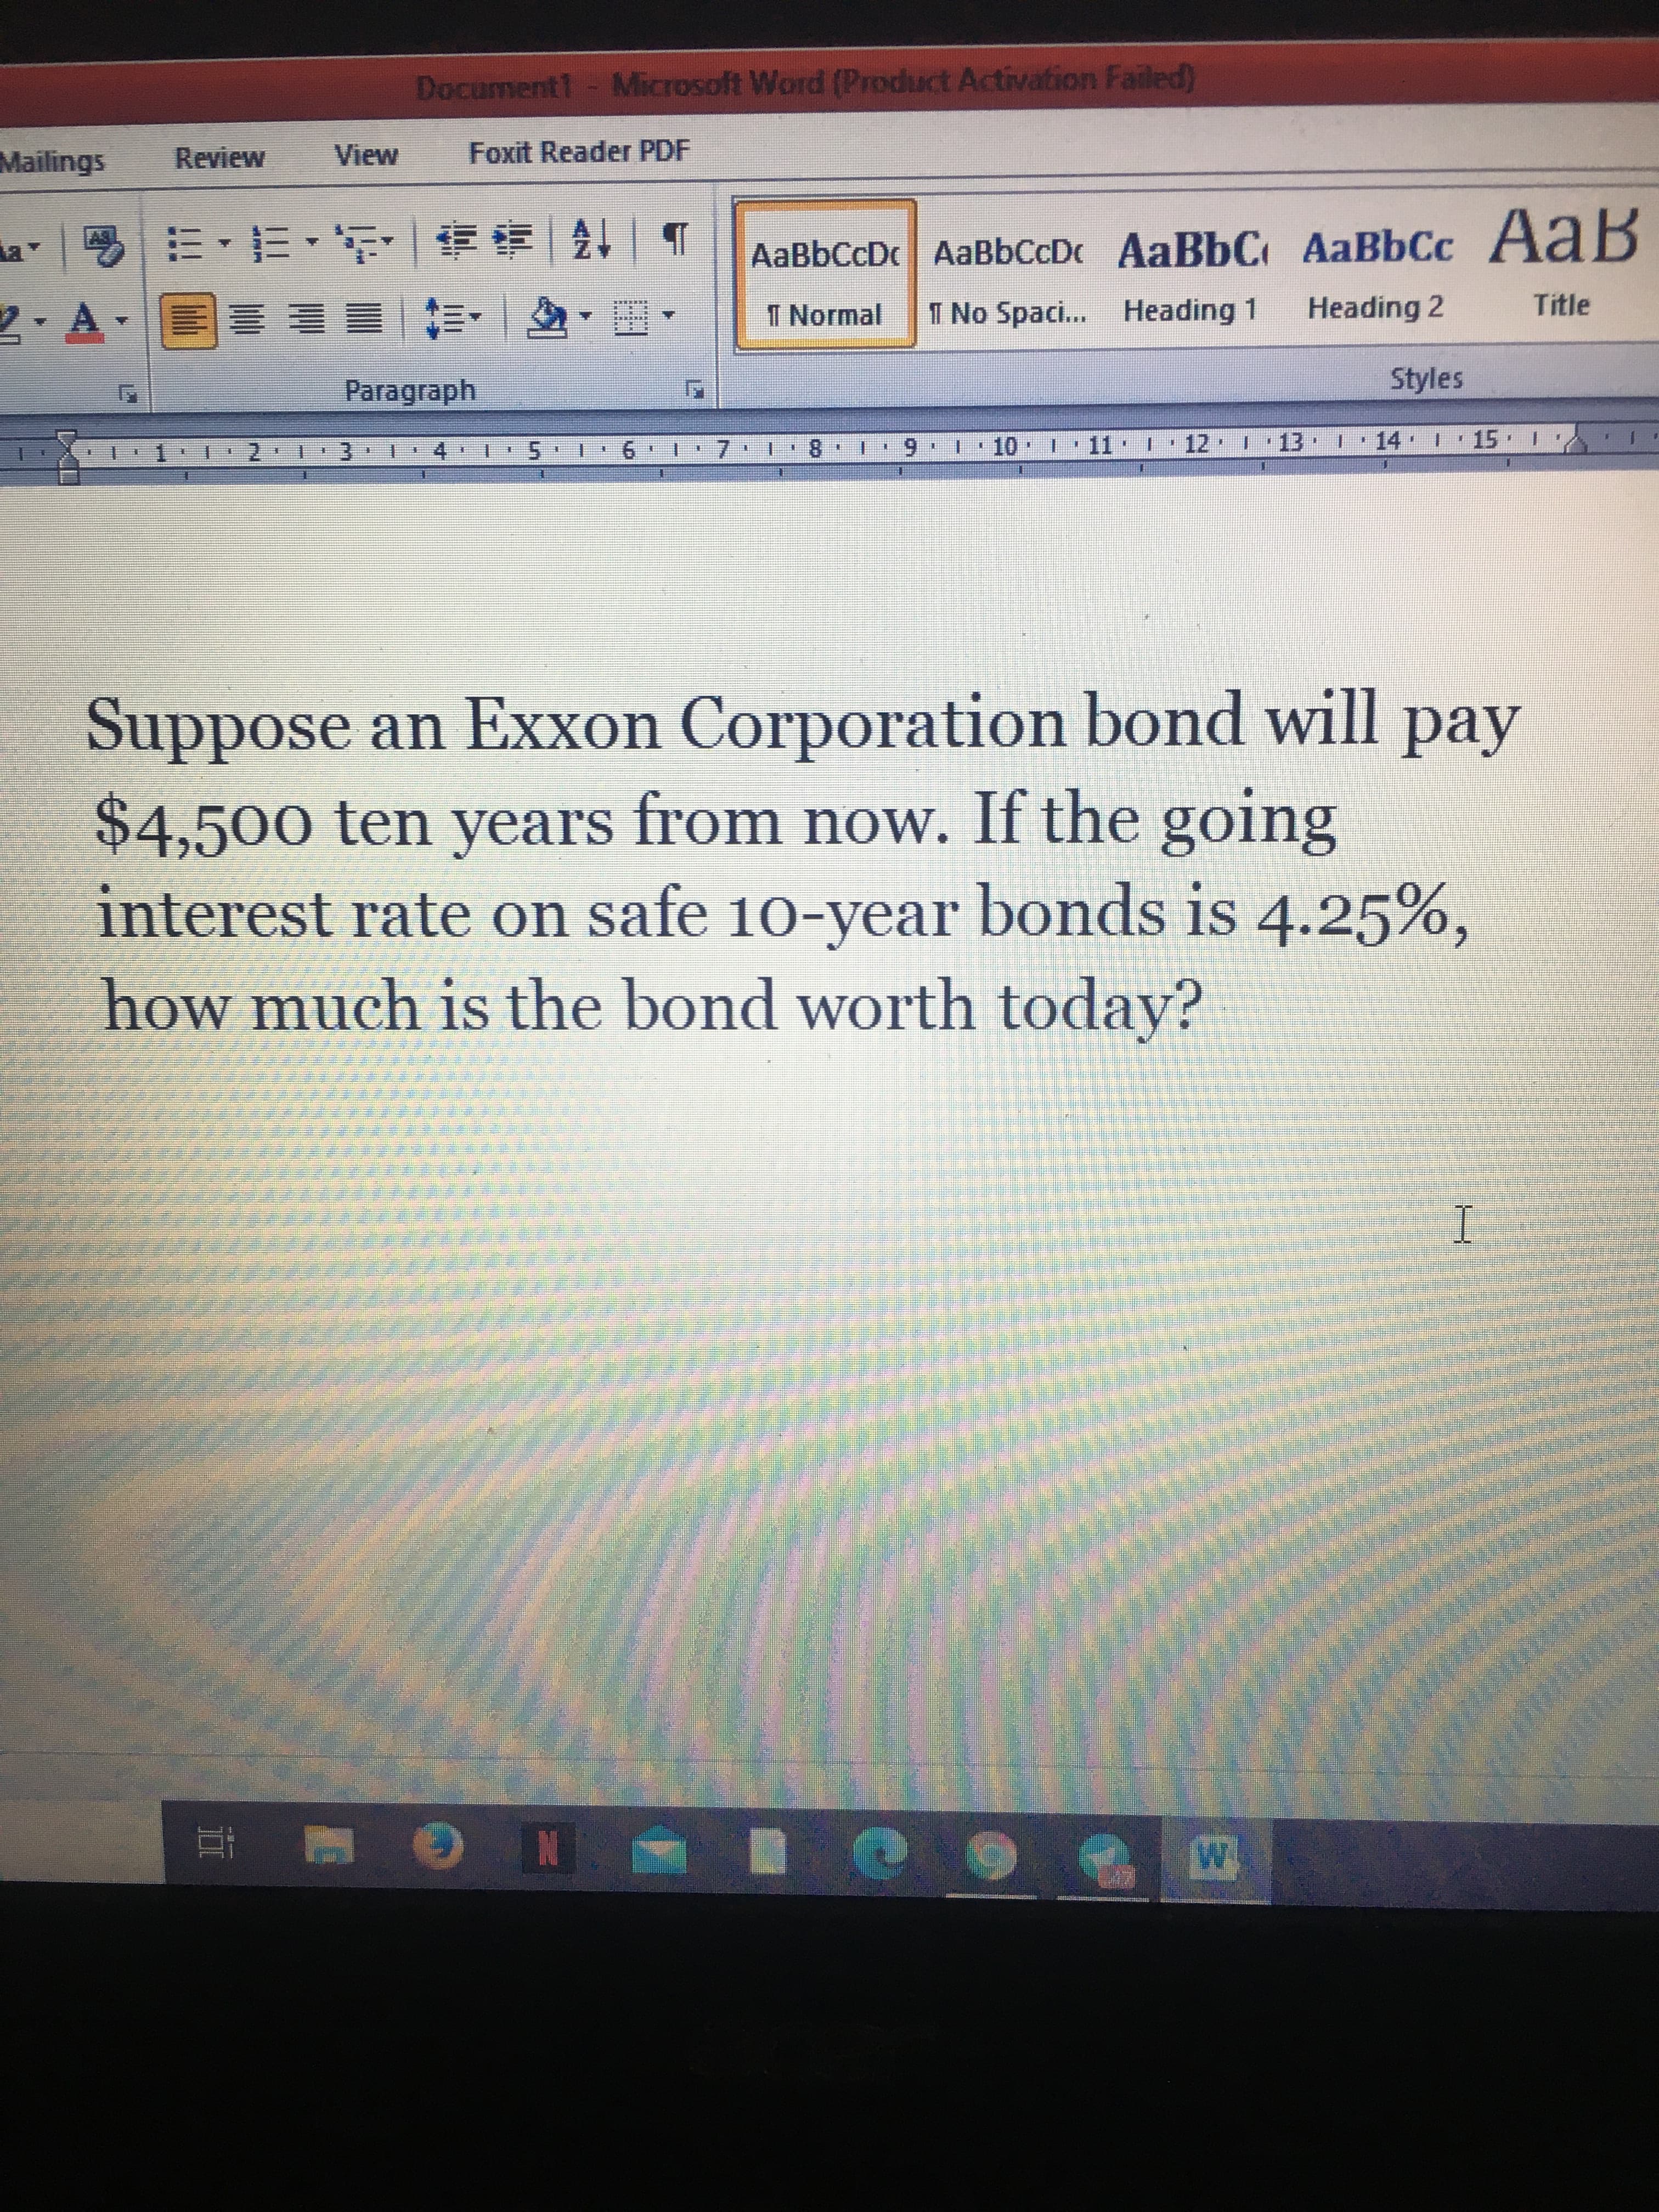 Suppose an Exxon Corporation bond will pa
$4,500 ten years from now. If the going
interest rate on safe 10-year bonds is 4.25%,
how much is the bond worth today?
